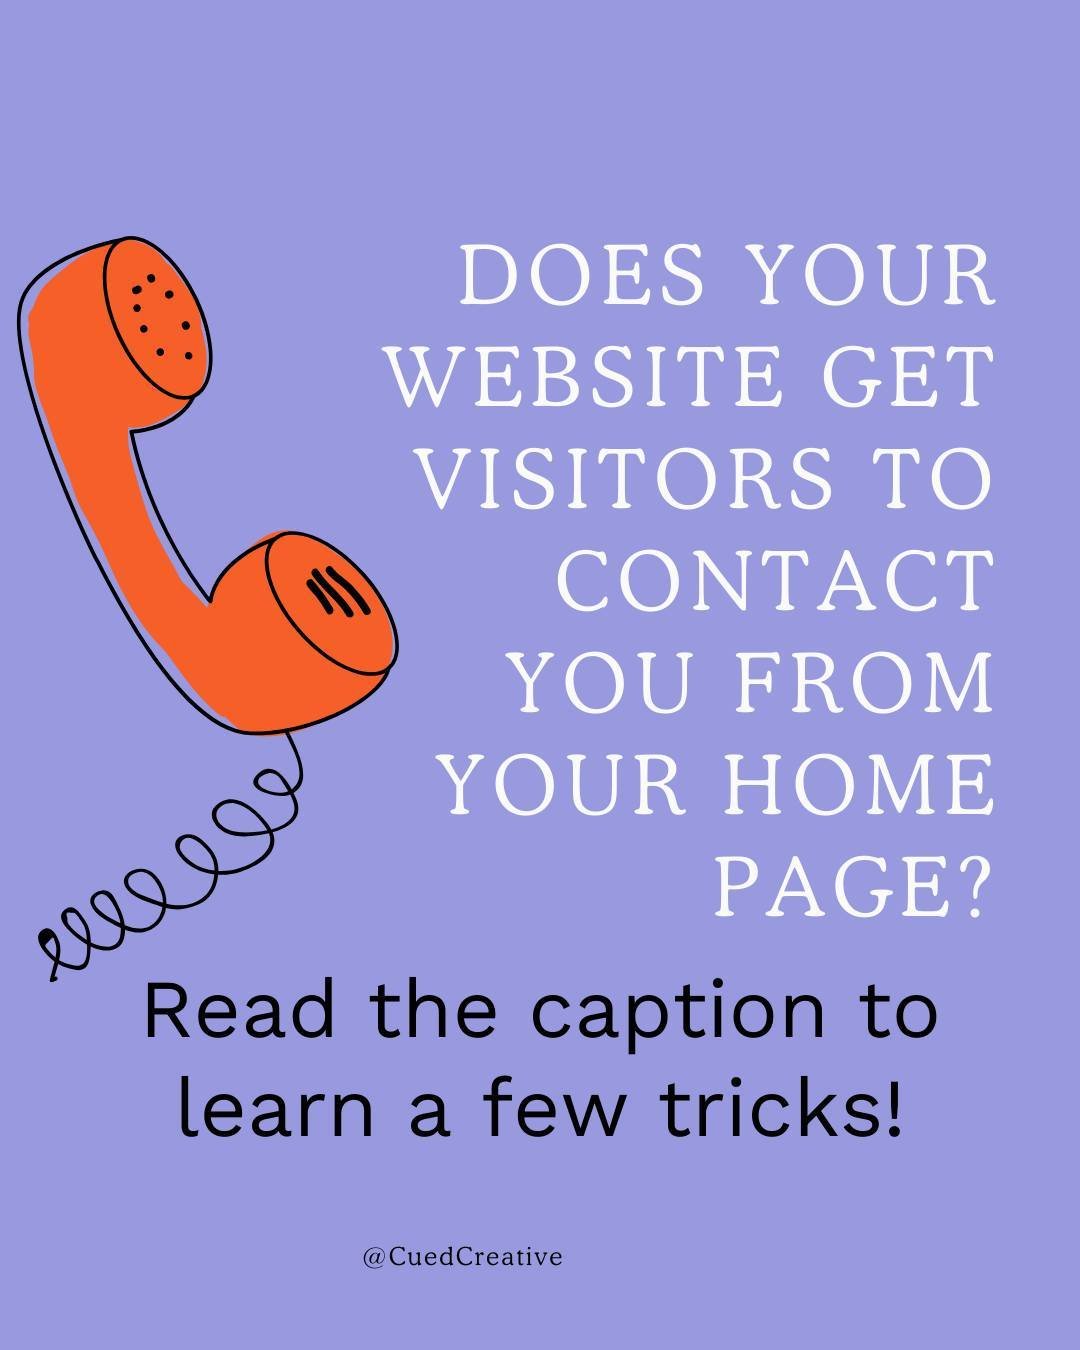 The home page of your website is your most important real estate so make it work for you. 

We get a lot of people reaching out to us because their website isn't bringing them new clients. And the most common issue we see is a poorly designed home pa